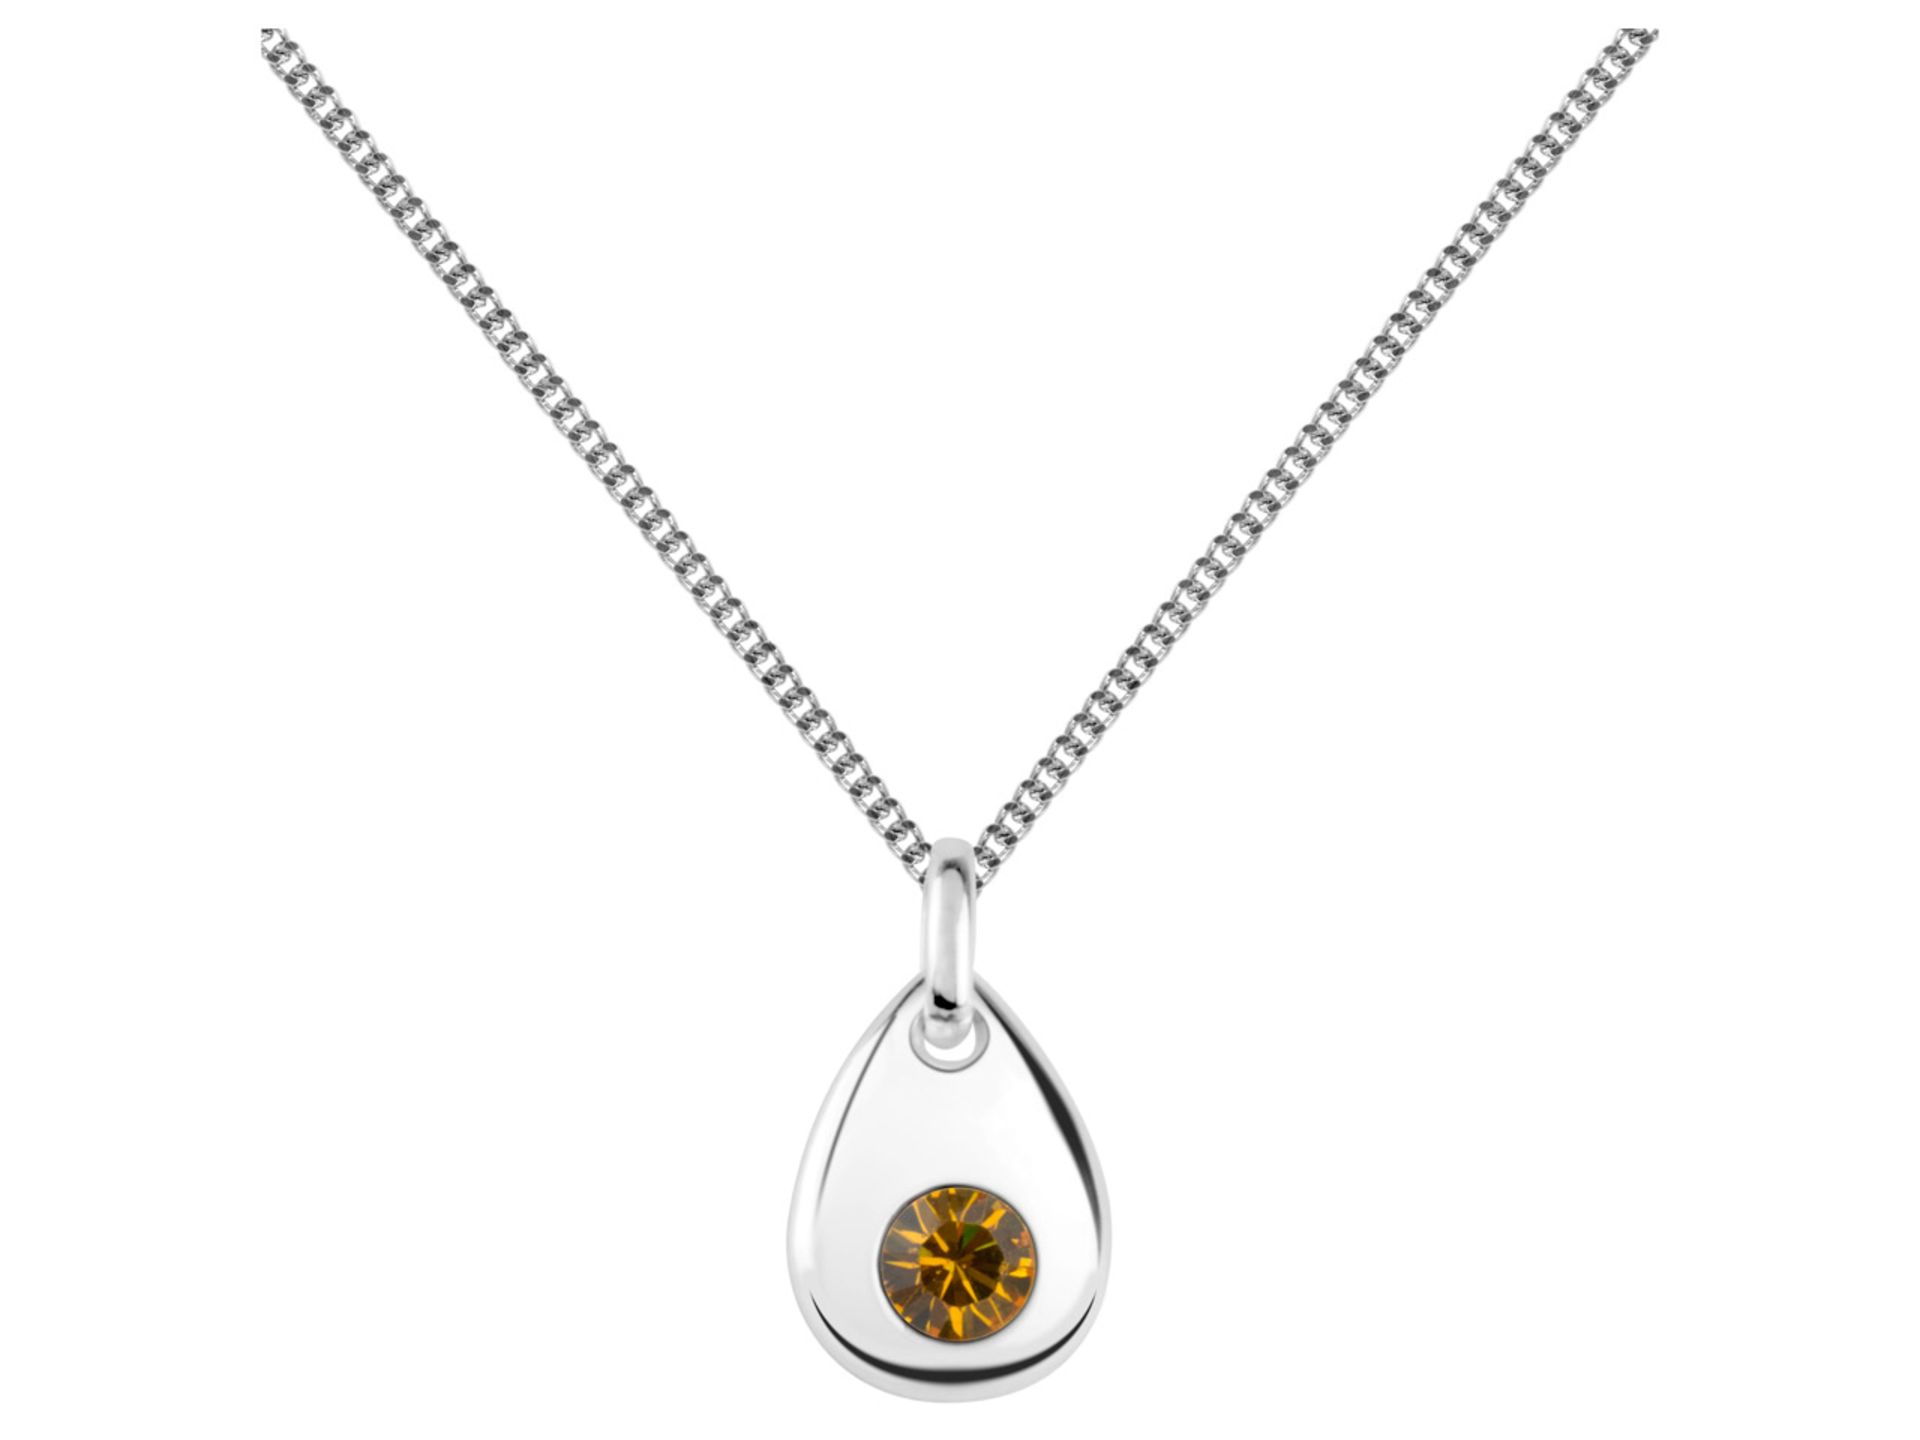 Sterling Silver Pendant November Birthstone 4mm Topaz Crystal - Valued By AGI £400.00 - This - Image 3 of 4